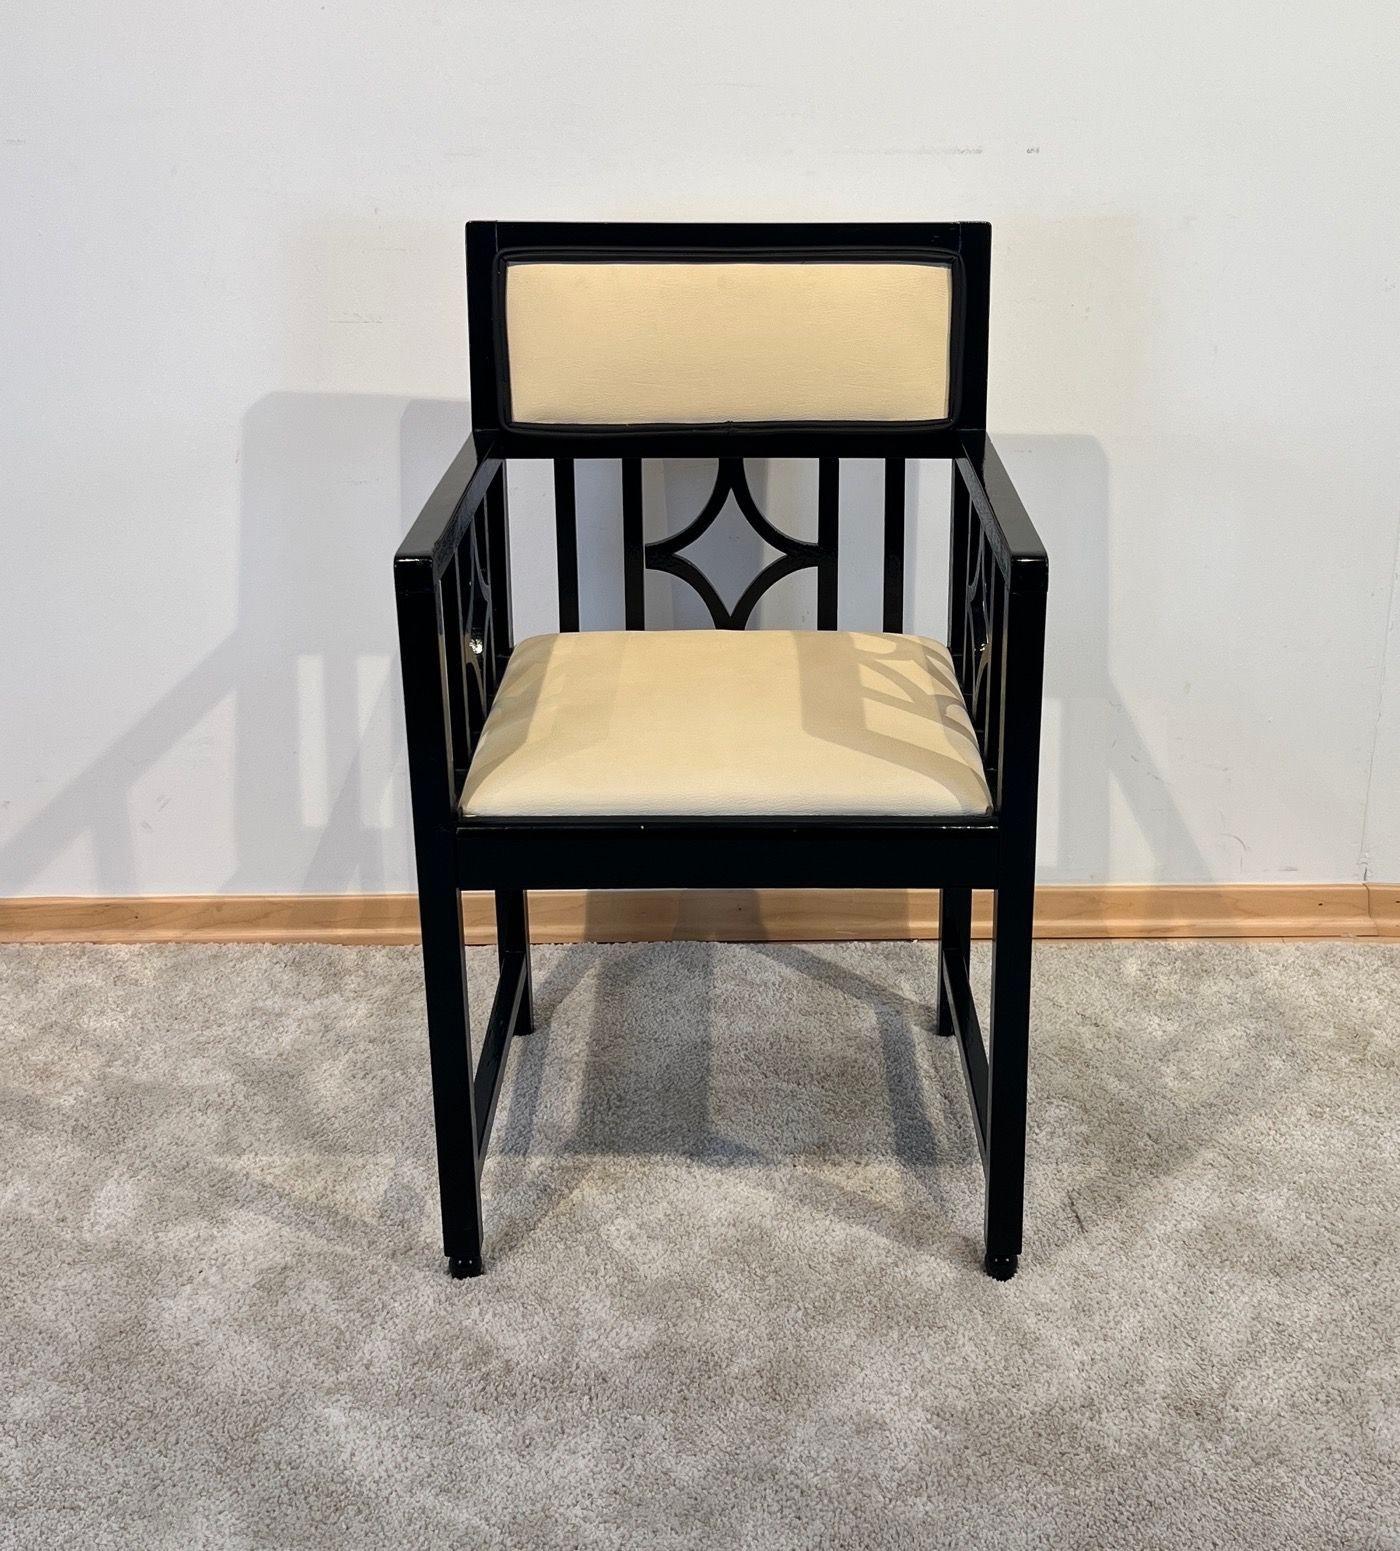 Bauhaus Armchair, Oak, Black Lacquer, Cream Leather, Germany circa 1920.
Beautiful german Bauhaus armchair or desk chair from the 1920s.
Oak solid wood, painted black. Cream-colored faux leather with black double keder.
At the back and on the sides